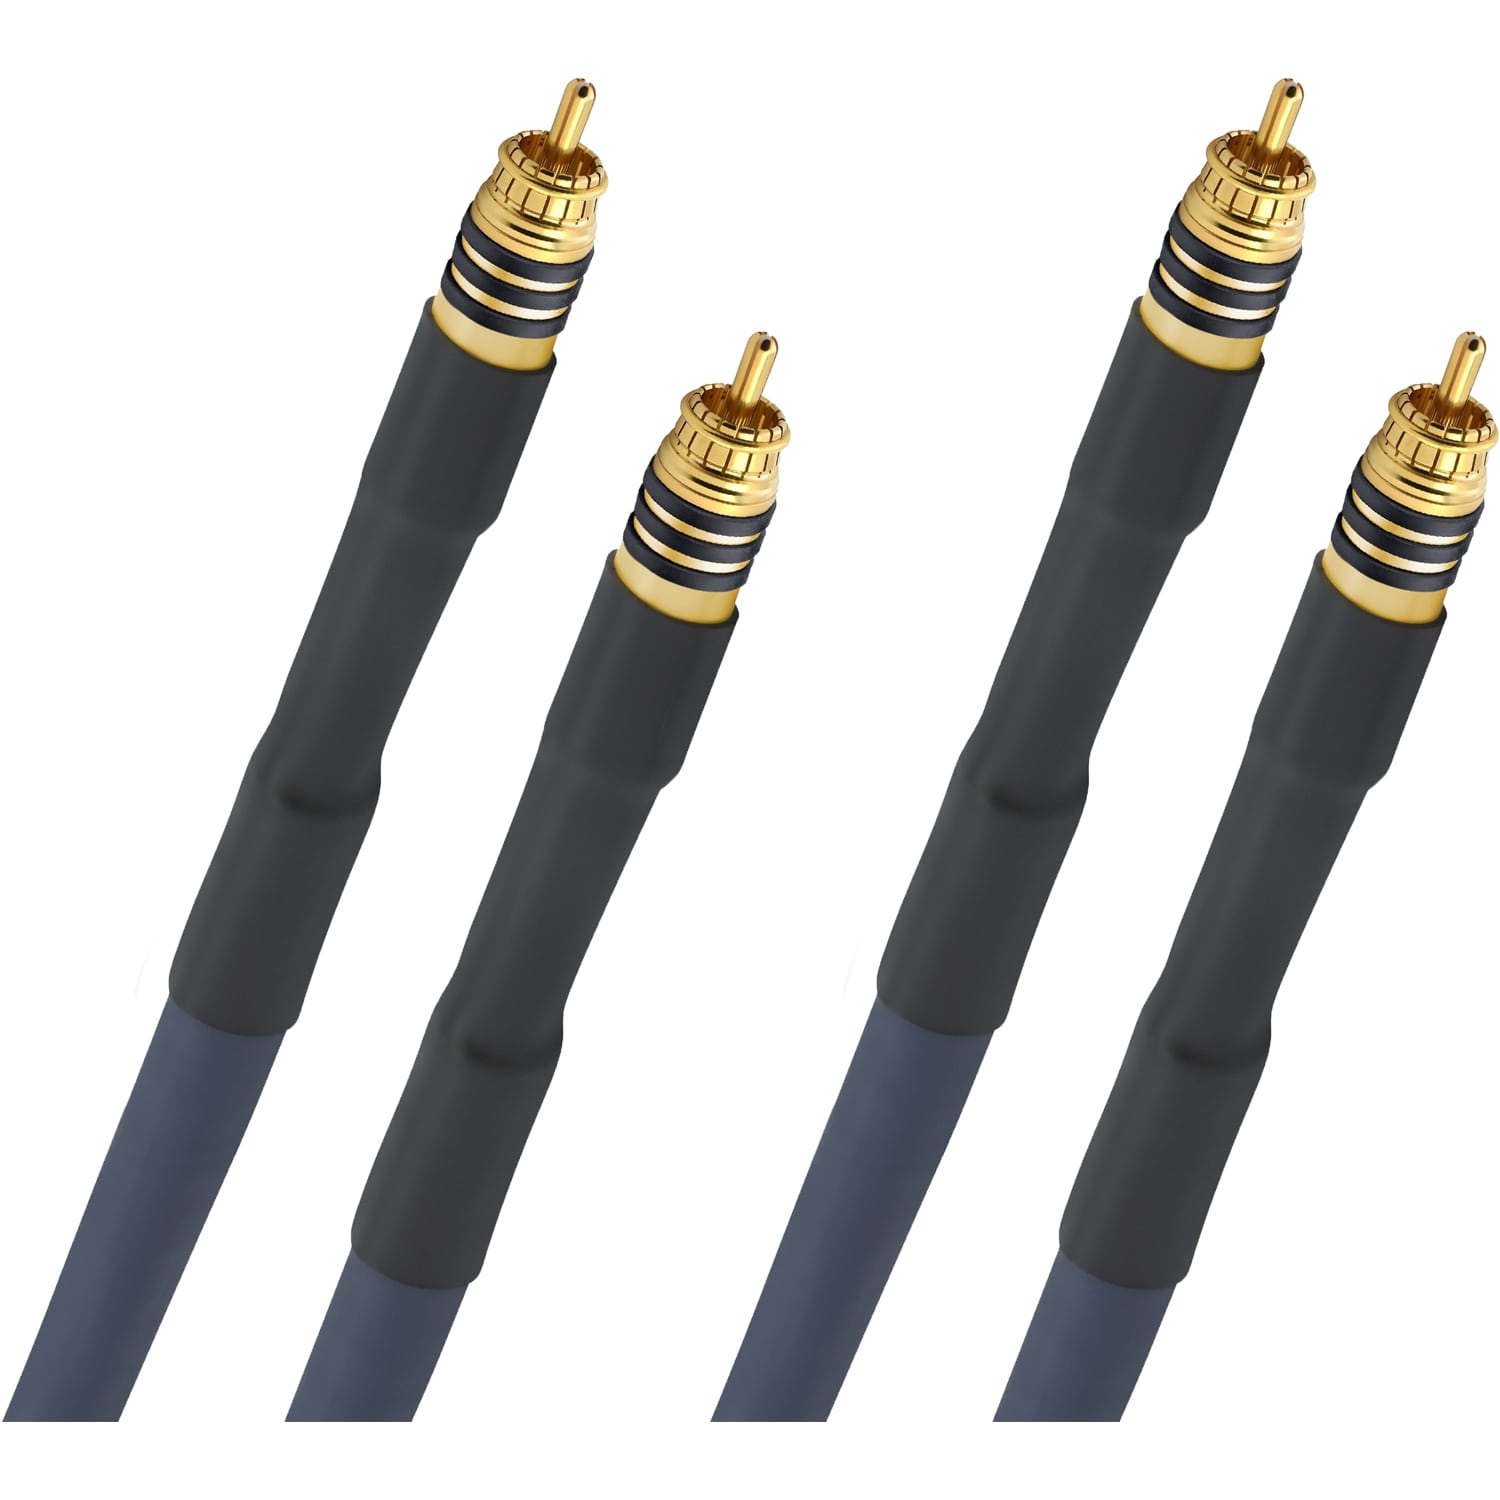 Кабели межблочные аудио Oehlbach STATE OF THE ART XXL Cable RCA, 2x1,25m, gold, D1C13113 силовые кабели oehlbach state of the art xxl powercord 1 5m d1c13061